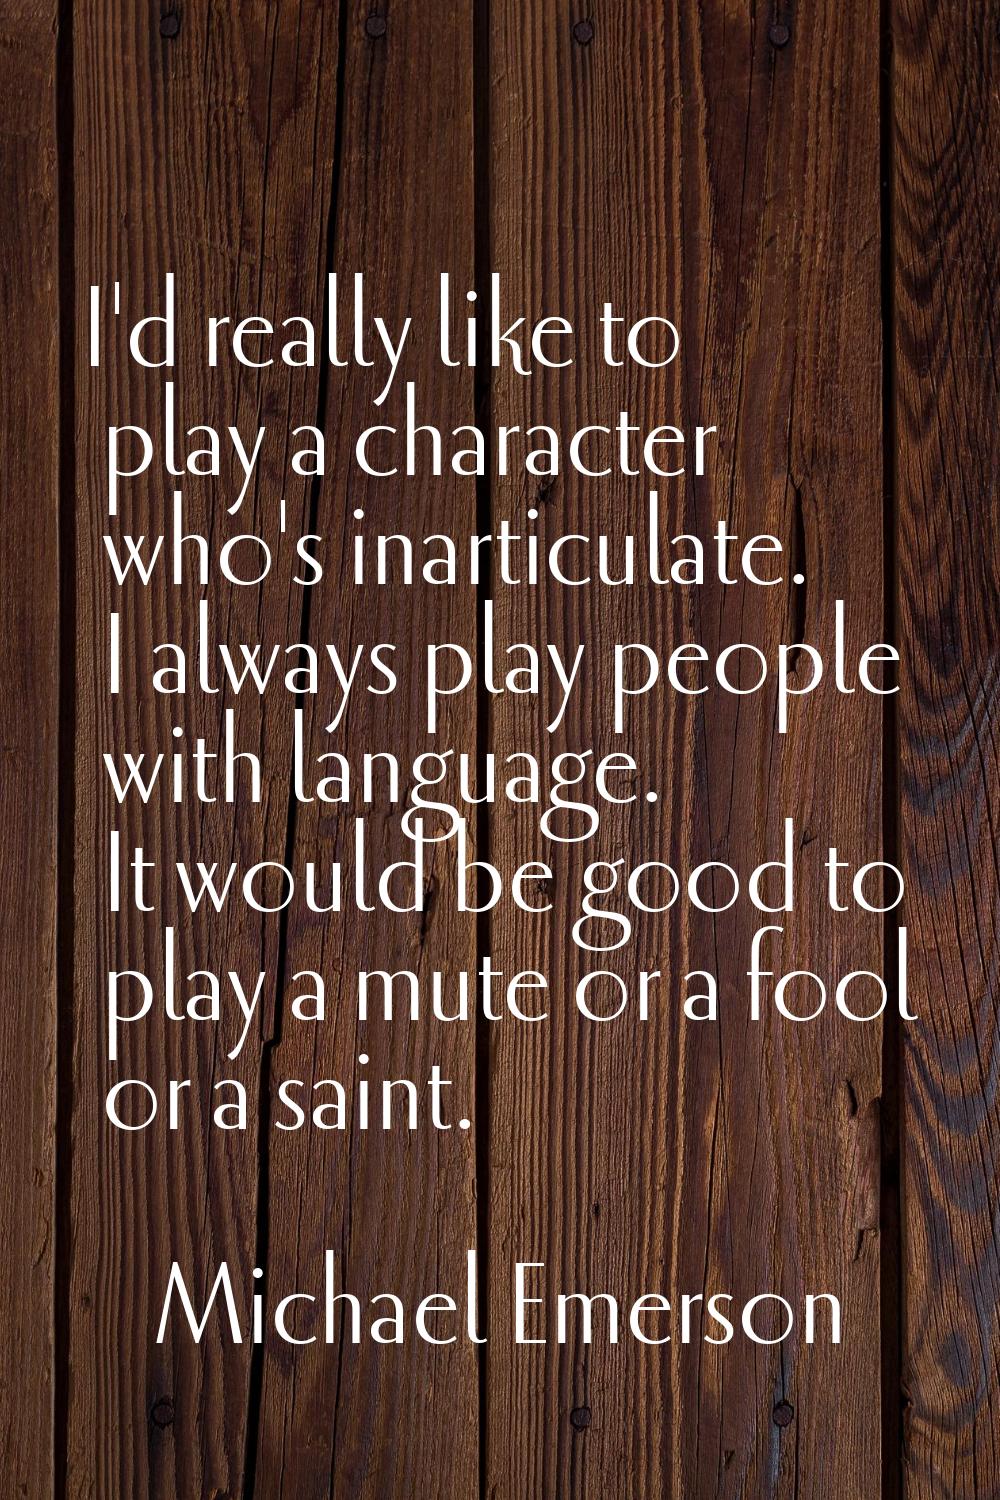 I'd really like to play a character who's inarticulate. I always play people with language. It woul